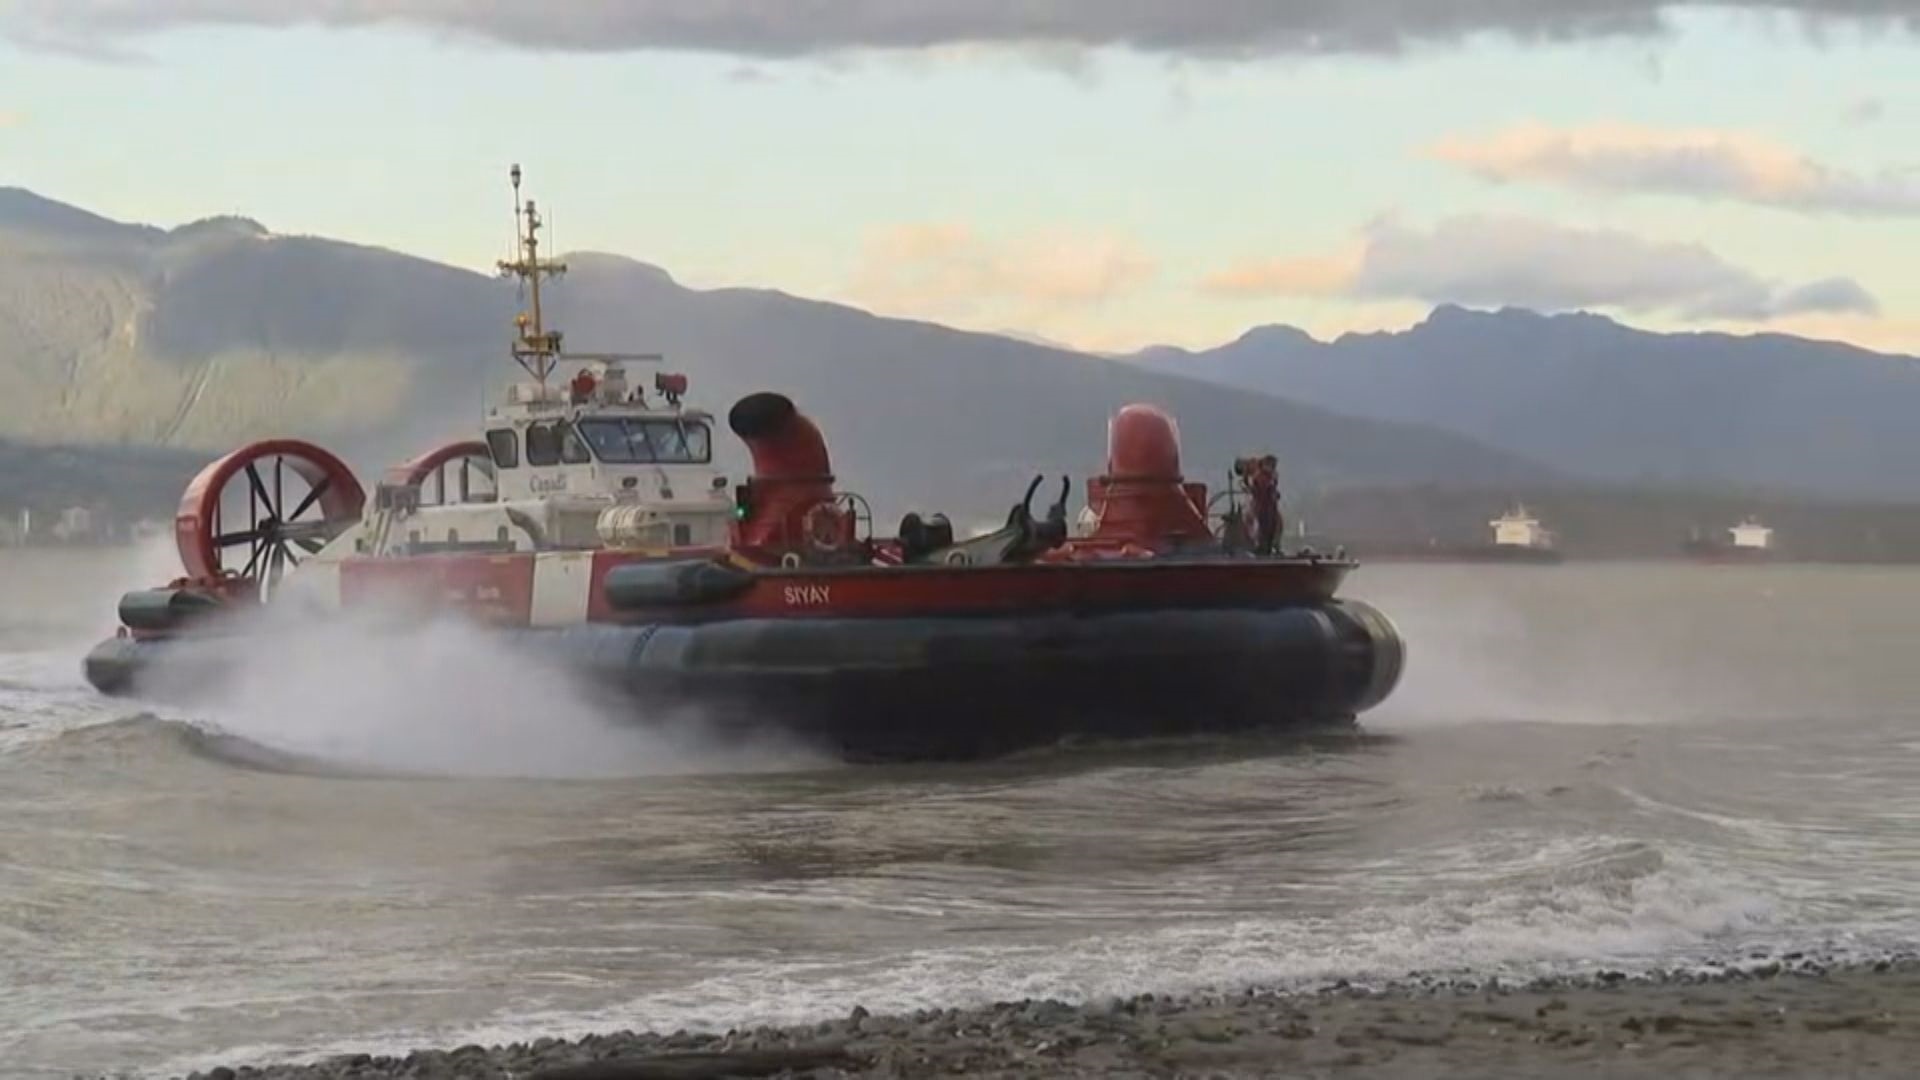 Wind, rough seas possible factors in capsizing tugboat that killed 61-year-old man